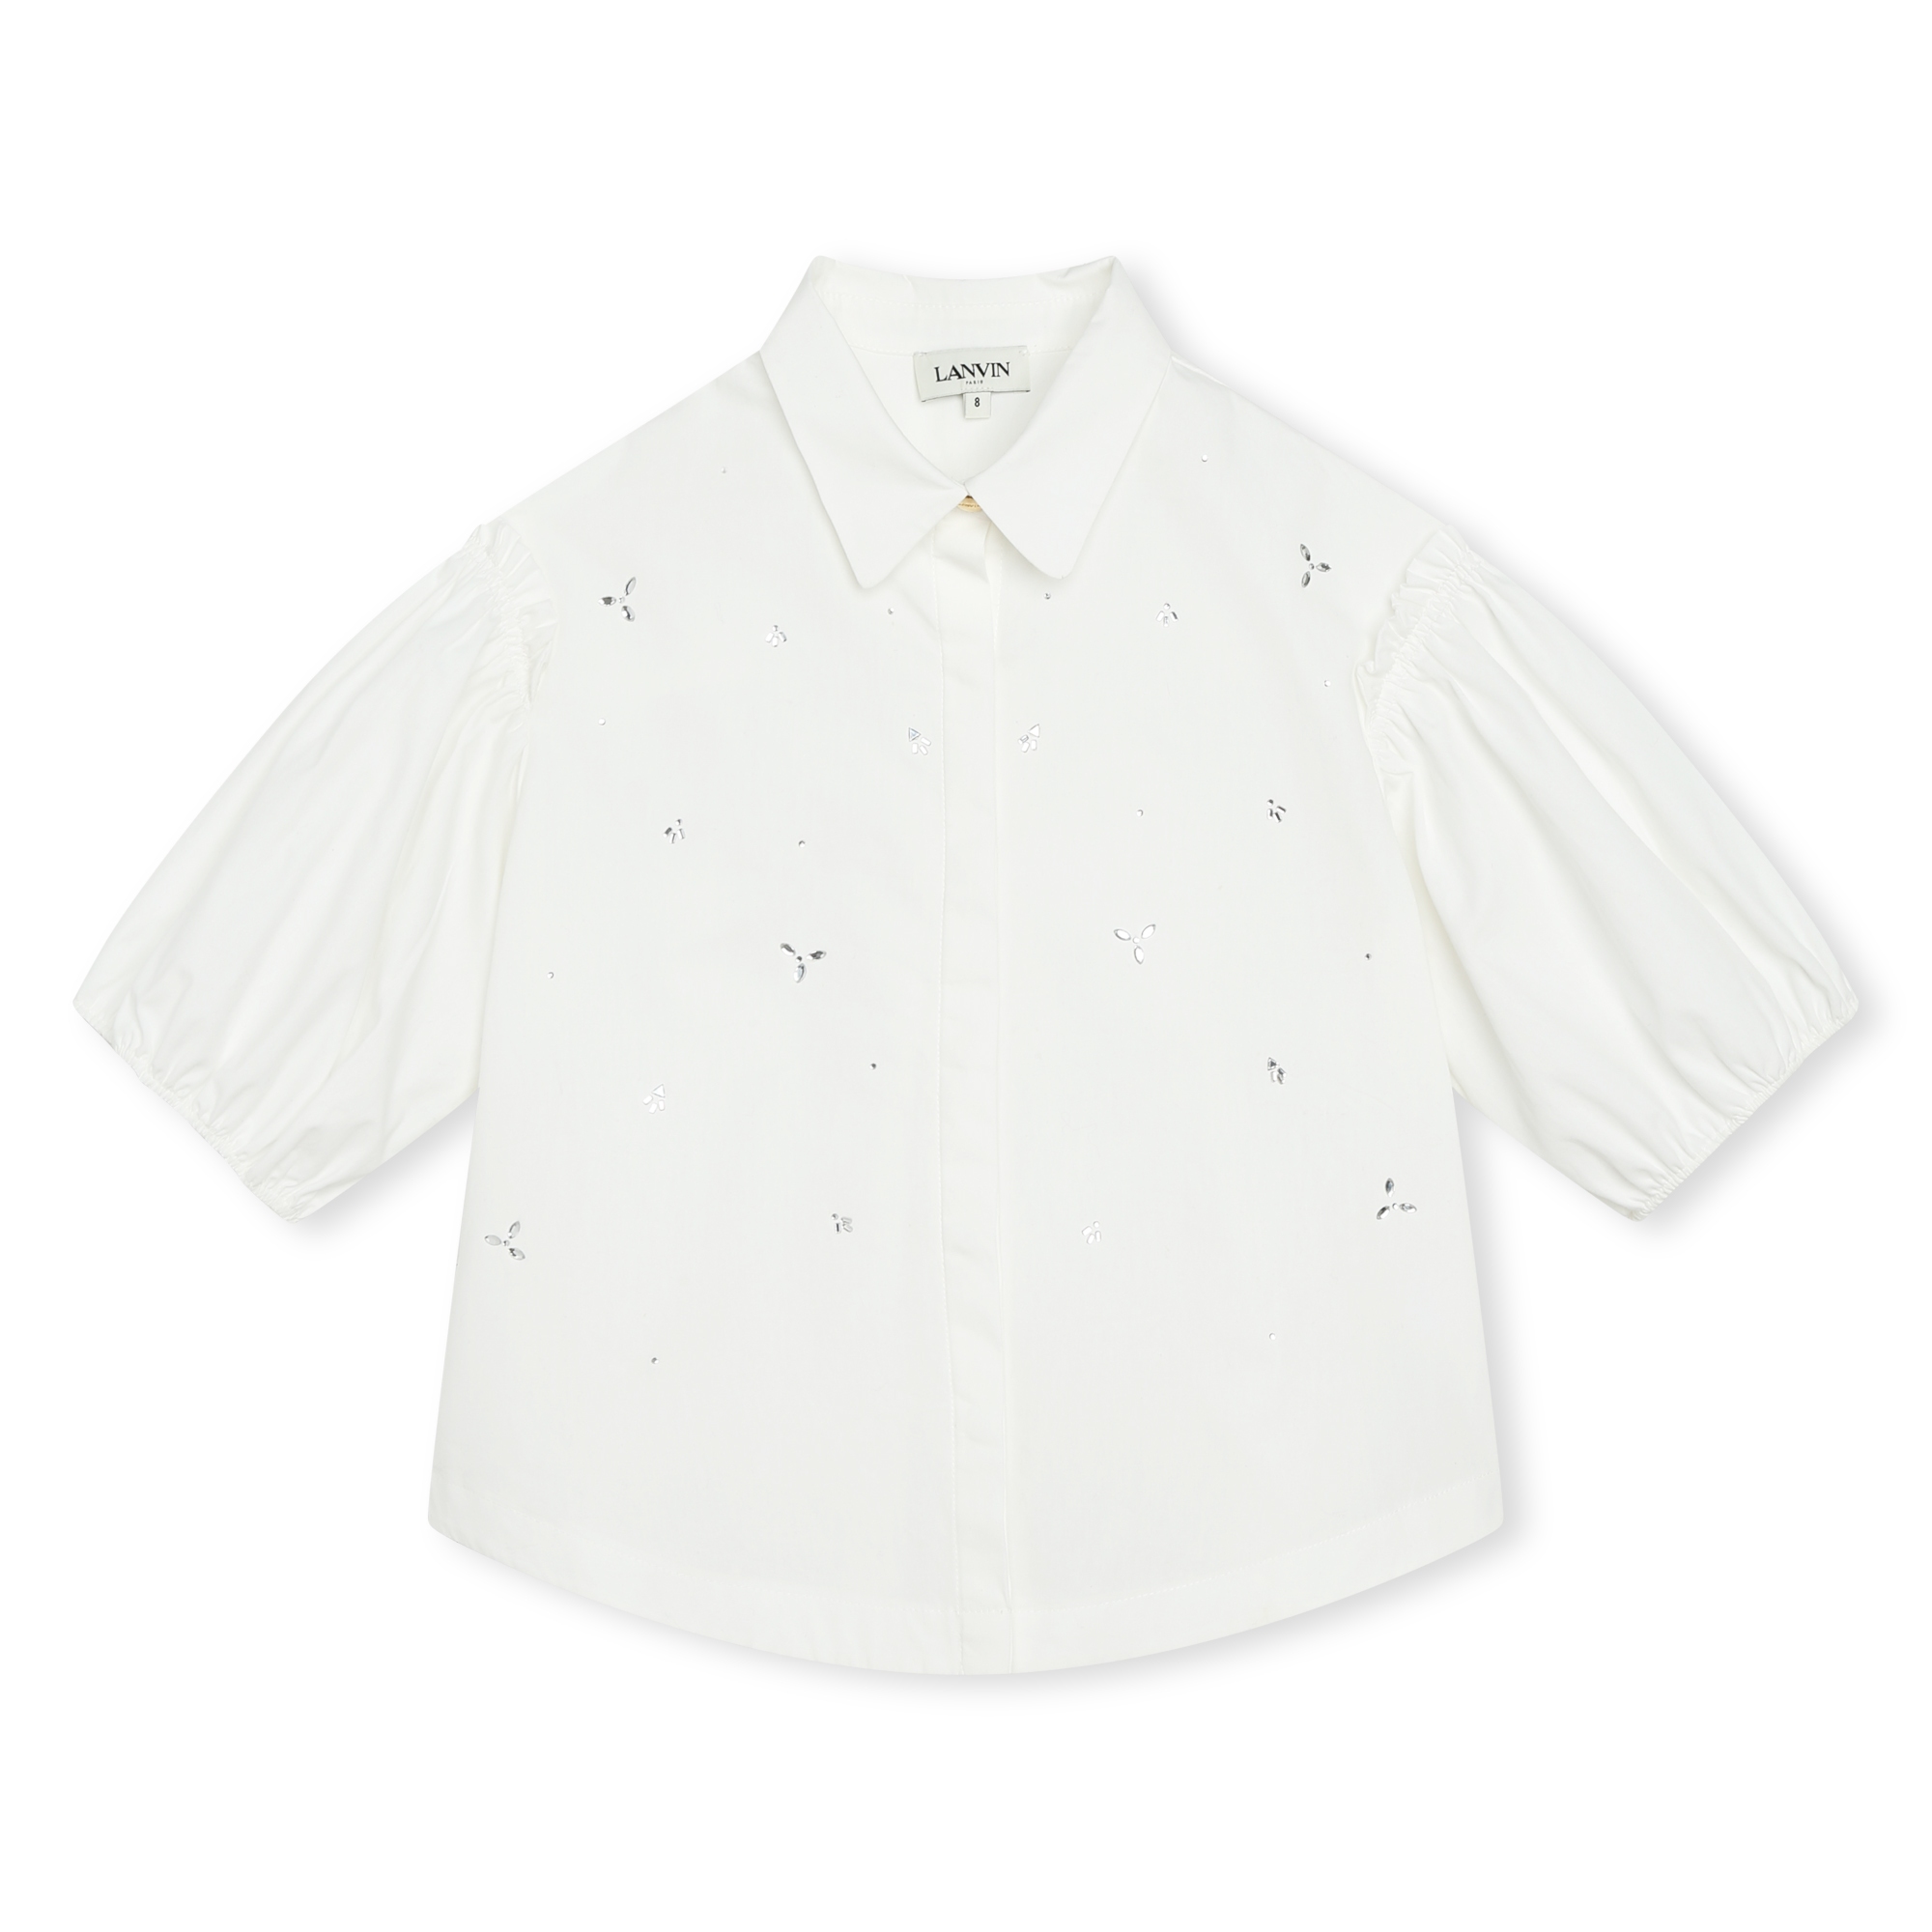 Rhinestone embroidered blouse LANVIN for GIRL